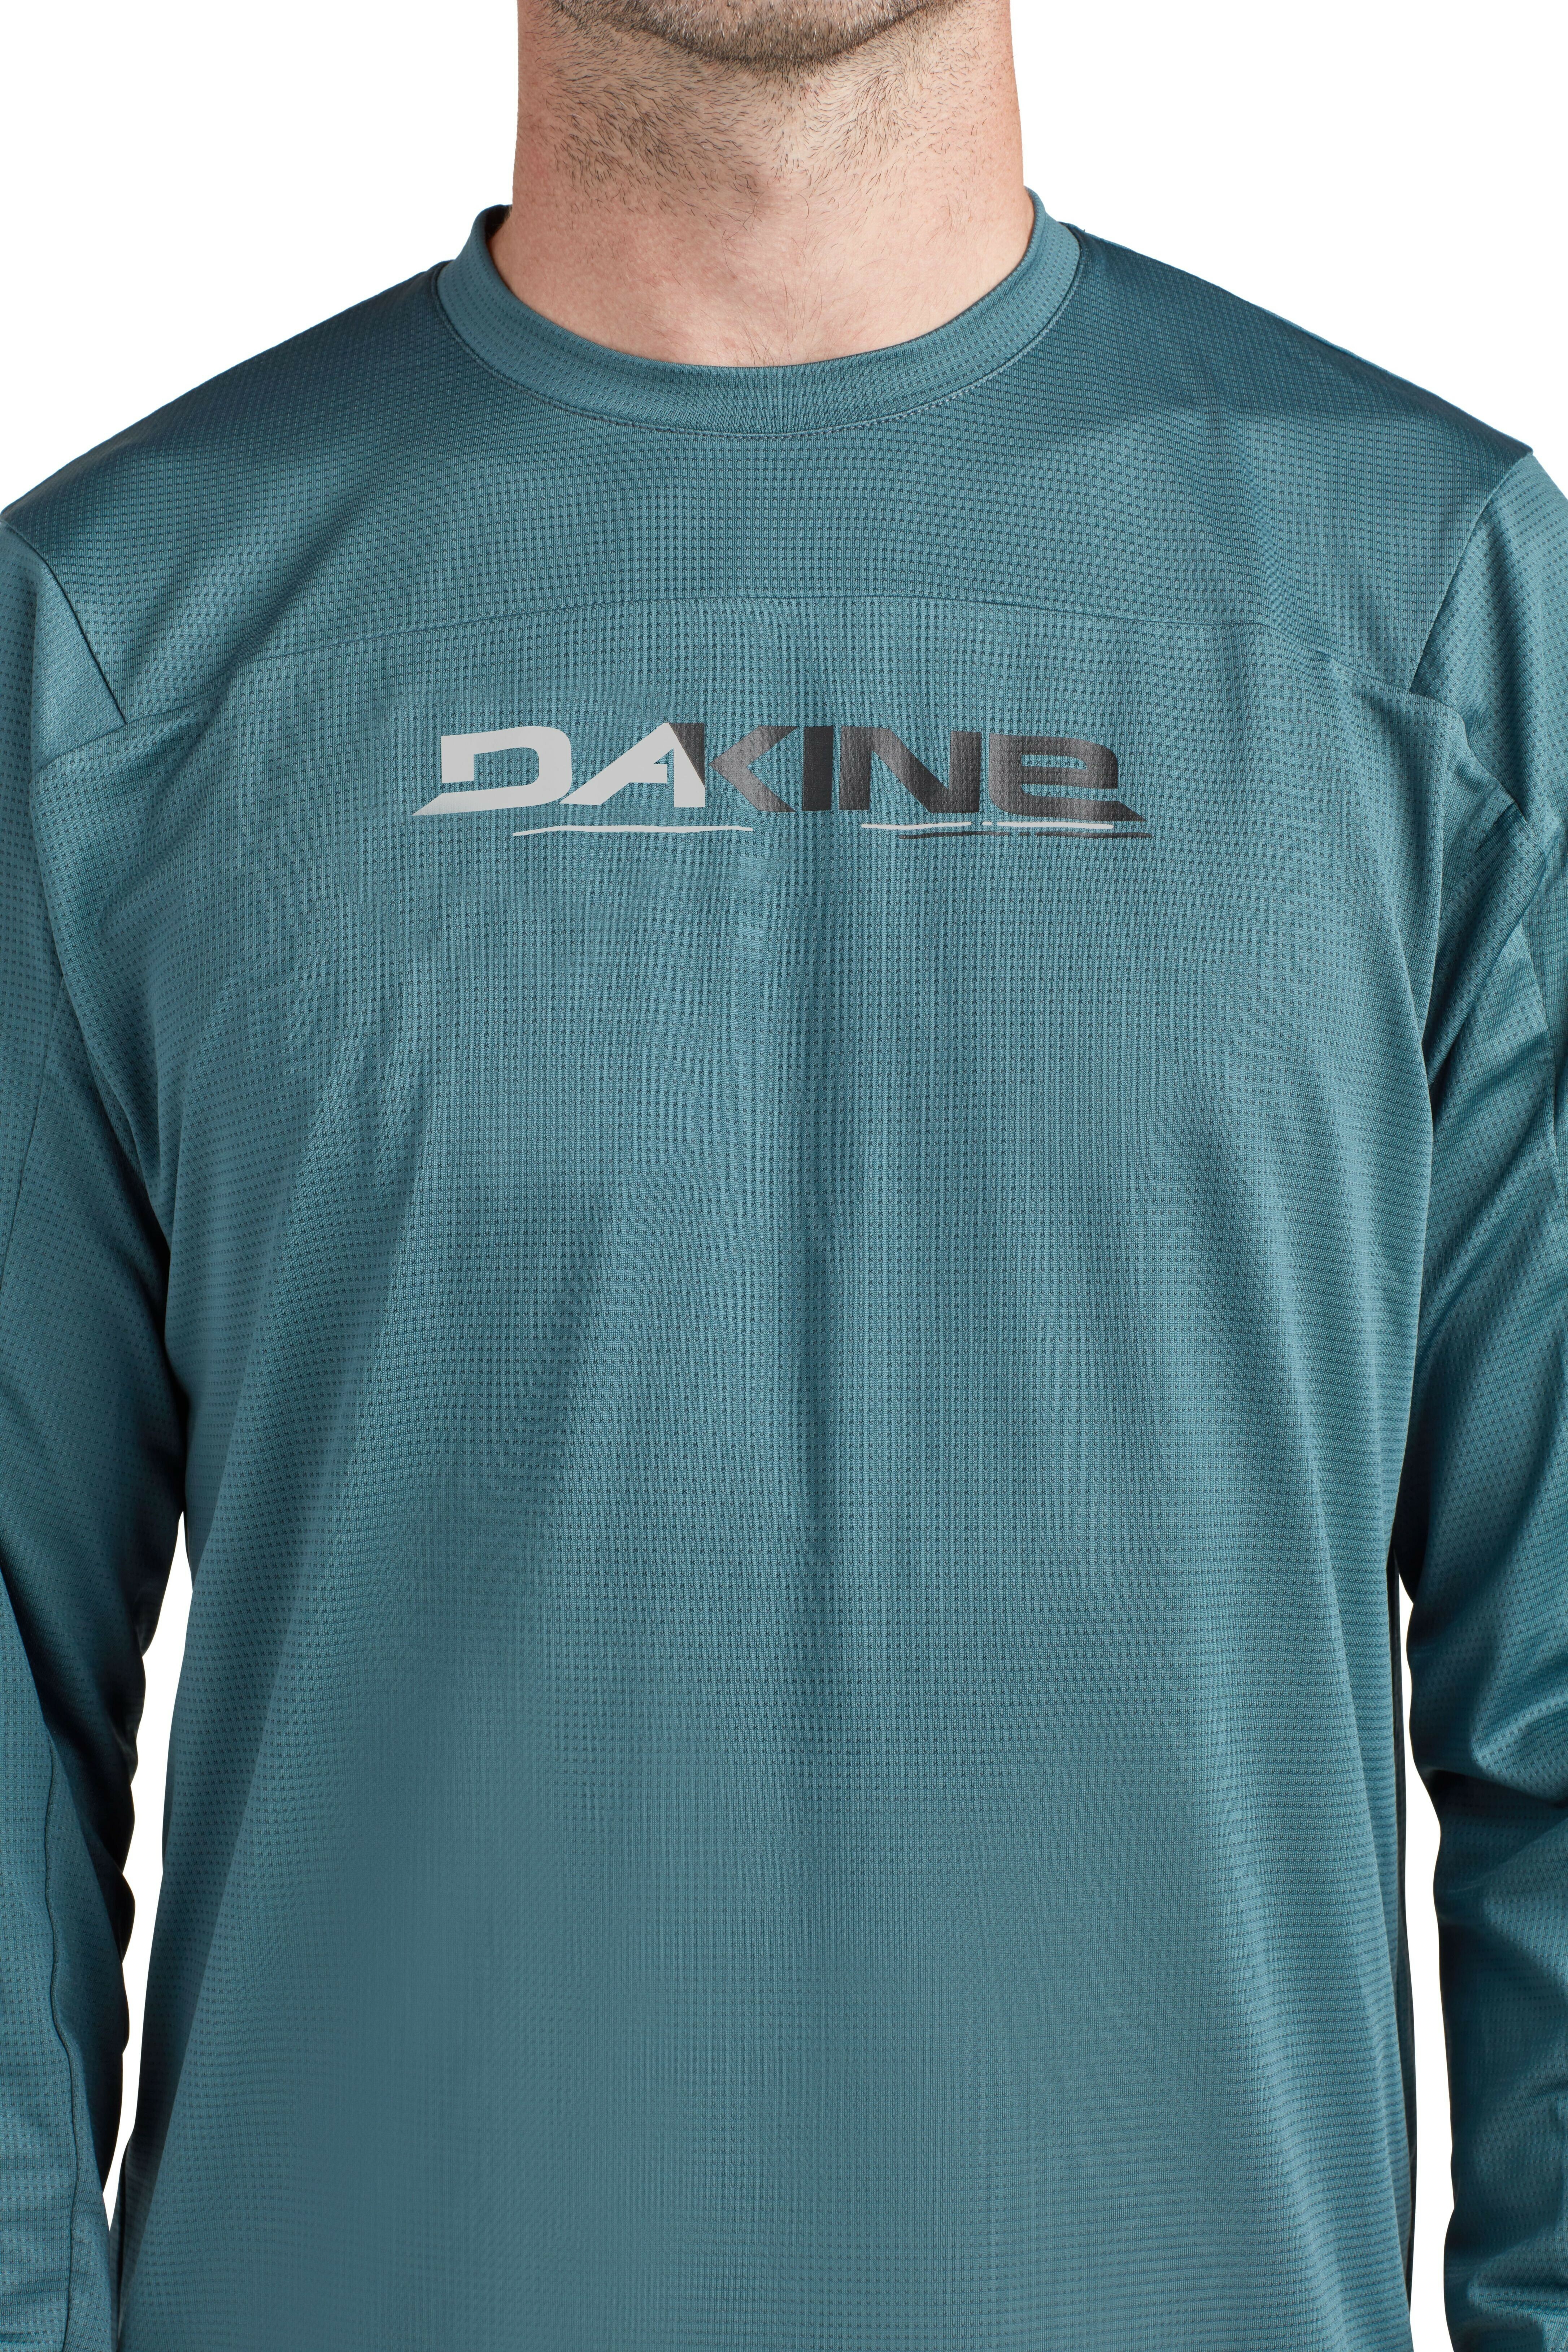 SYNCLINE L/S JERSEY